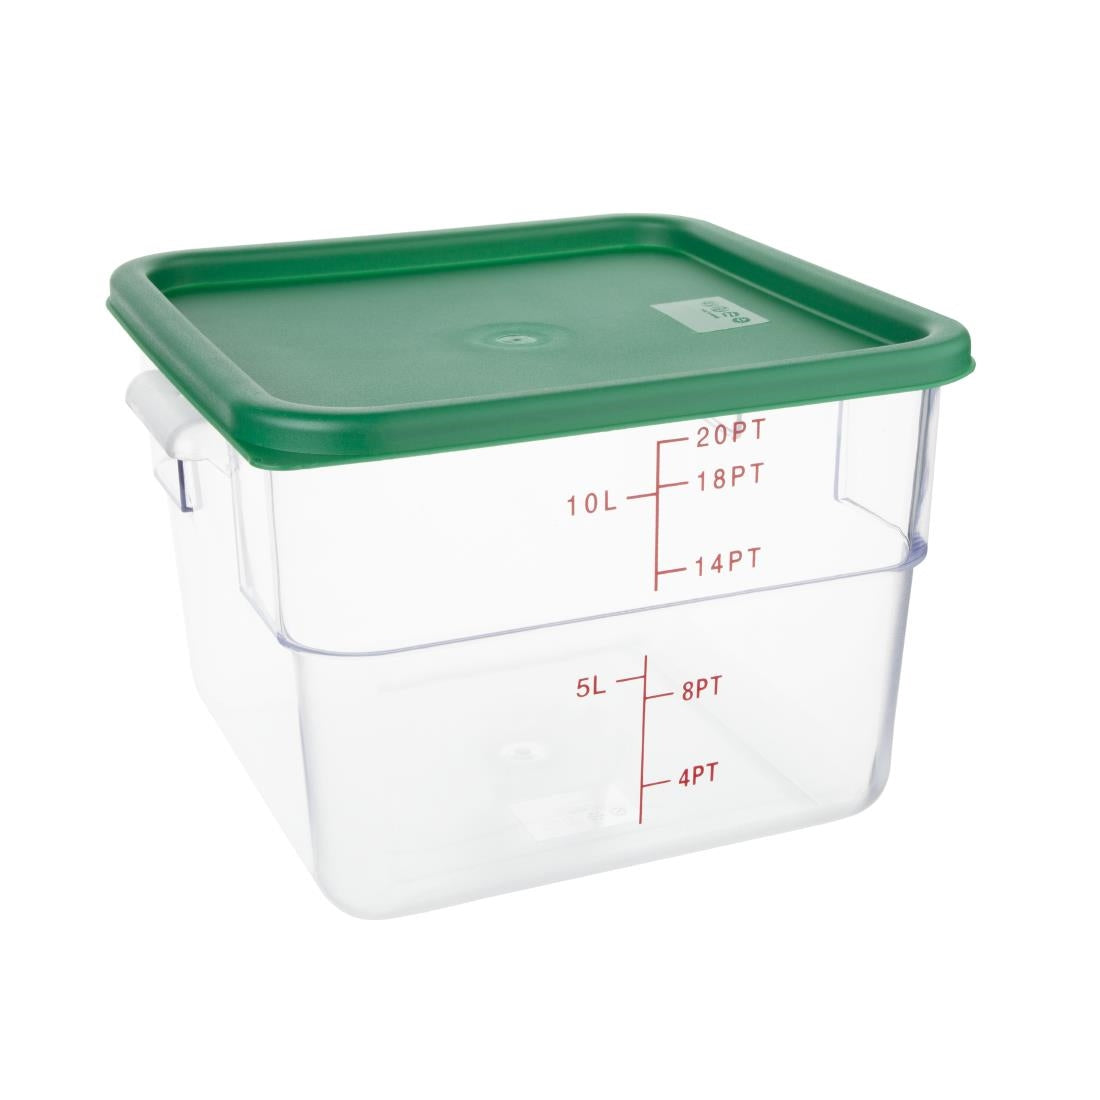 Vogue Polycarbonate Square Food Storage Container Lid Green Large